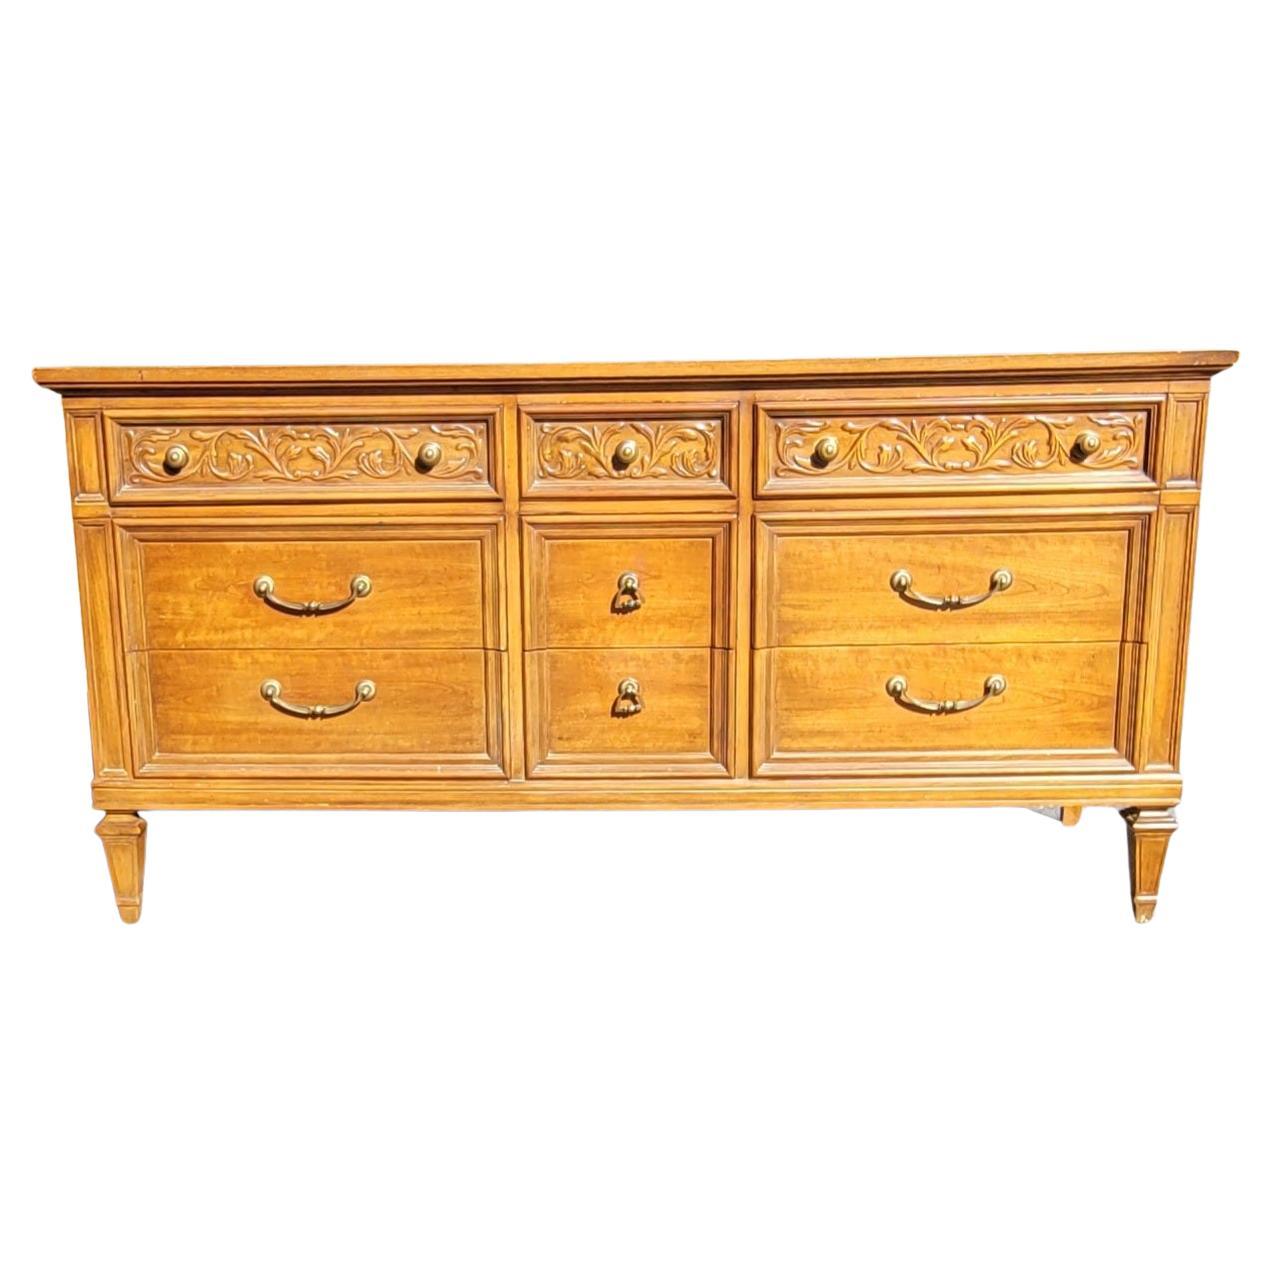 A beautiful 9-drawer Thomasville Neoclassical Style Fruitwood triple dresser in good vintage condition. Features 9  dovetailed drawers with original heavy duty drawer pulls and knobs, top drawers flanked with skillfully carved flowers throughout.